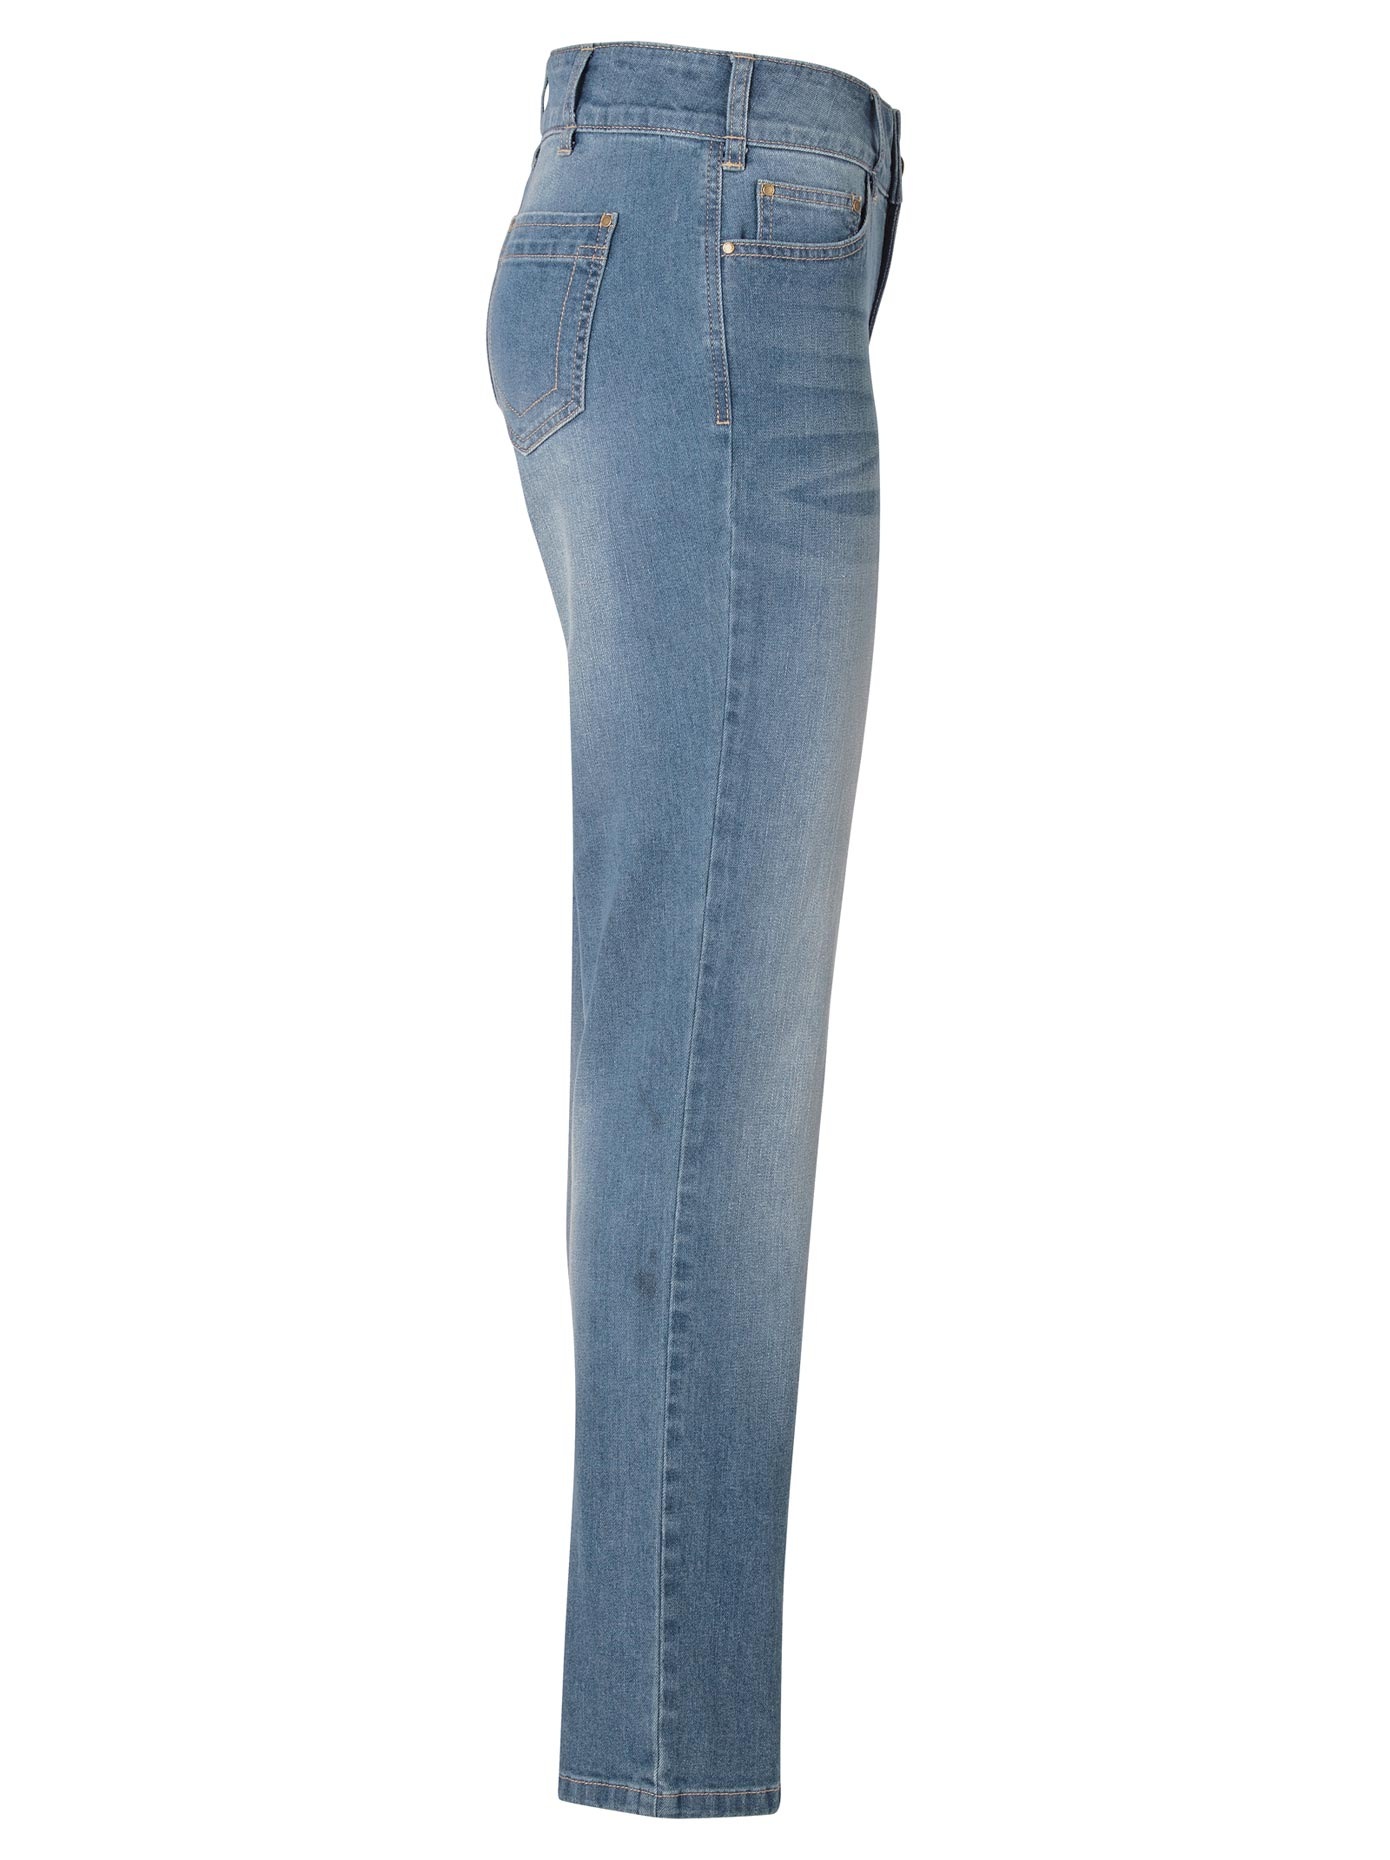 OTTO Casual Jeans, im Looks Online Bequeme (1 Shop tlg.)